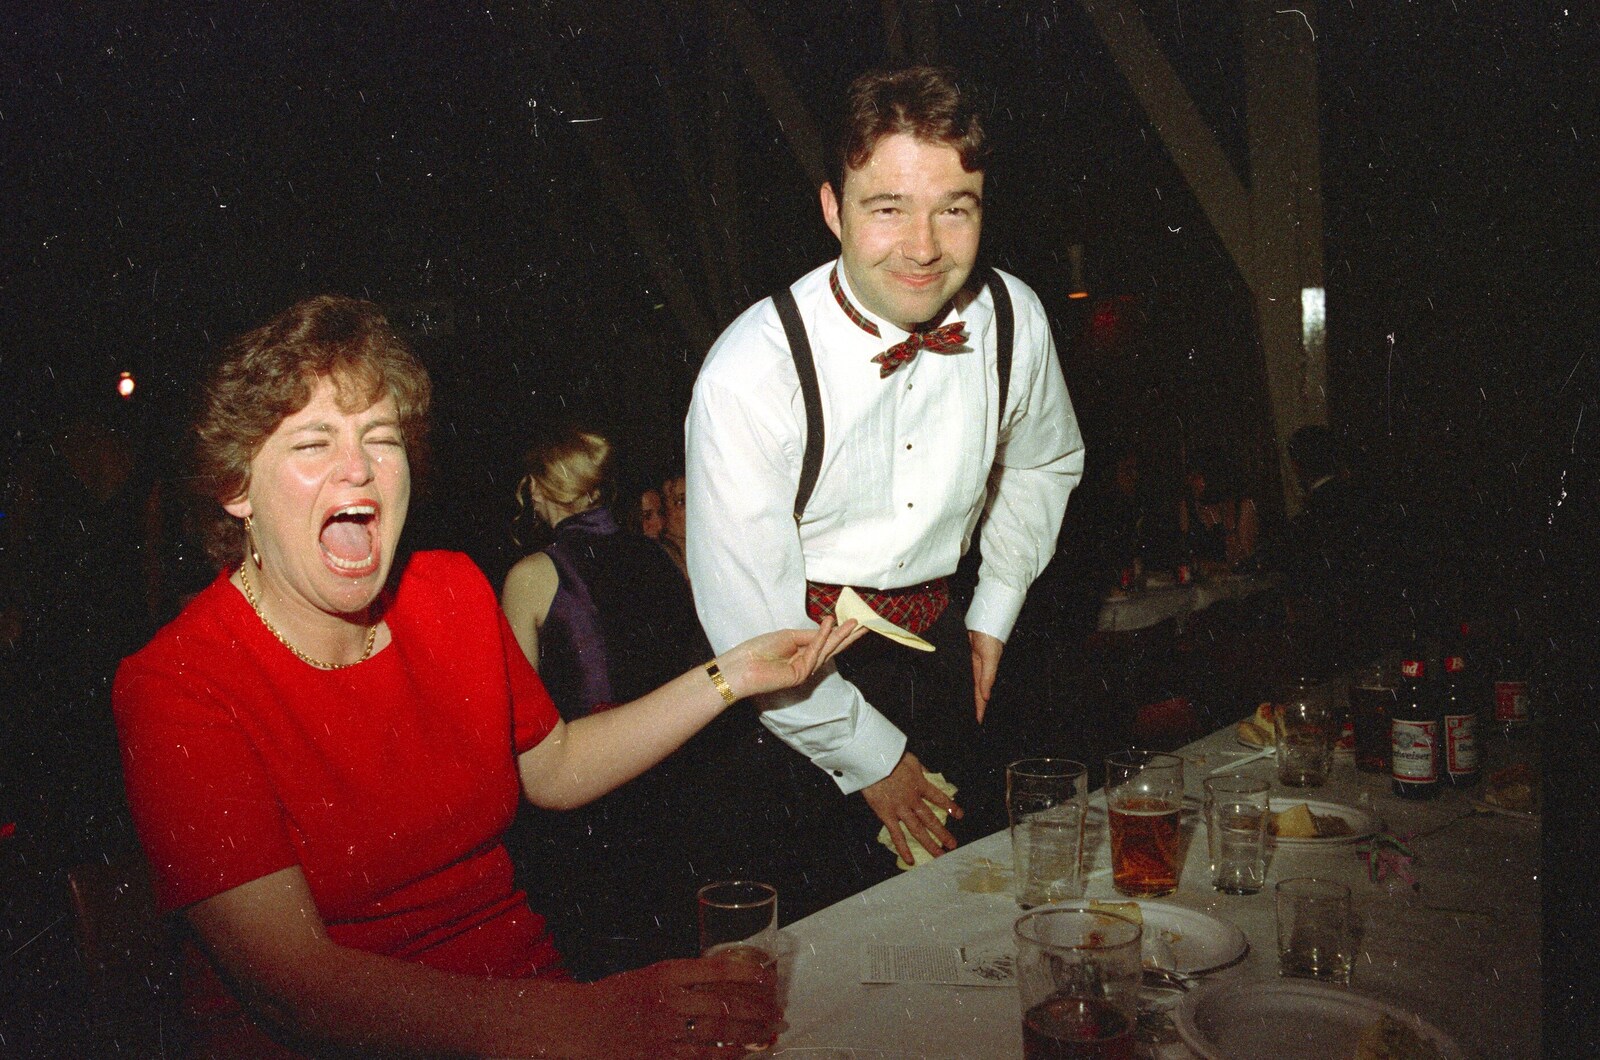 Shouting about something from CISU at the Suffolk College May Ball, Ipswich, Suffolk - 11th May 1997